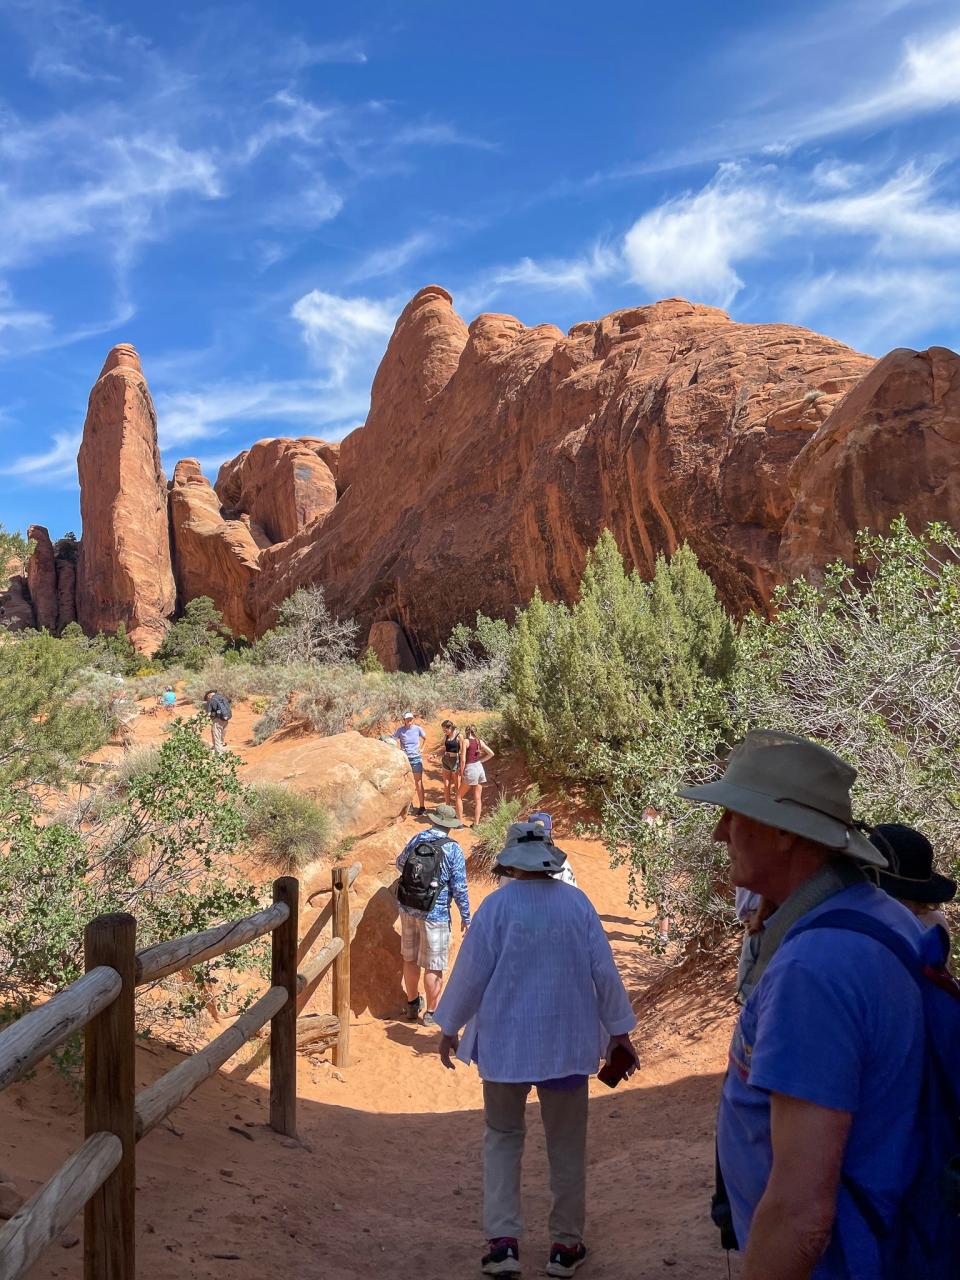 A crowded hike at Arches National Park in Utah.